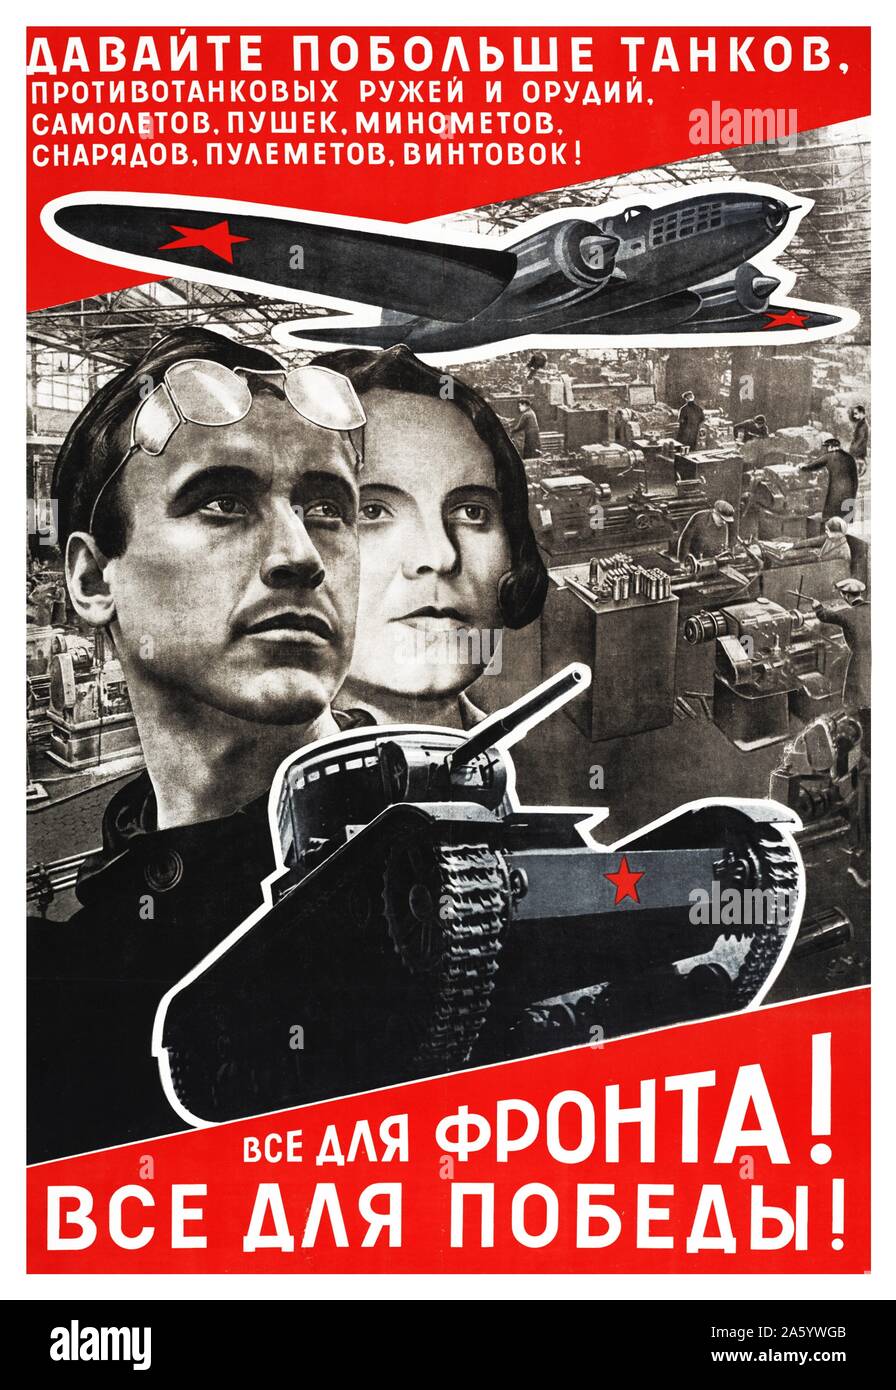 Russian, Soviet, Communist propaganda poster, exhorting Russians to build more tanks, for winning the war against Nazi Germany. By Lissitzky 1941 Stock Photo